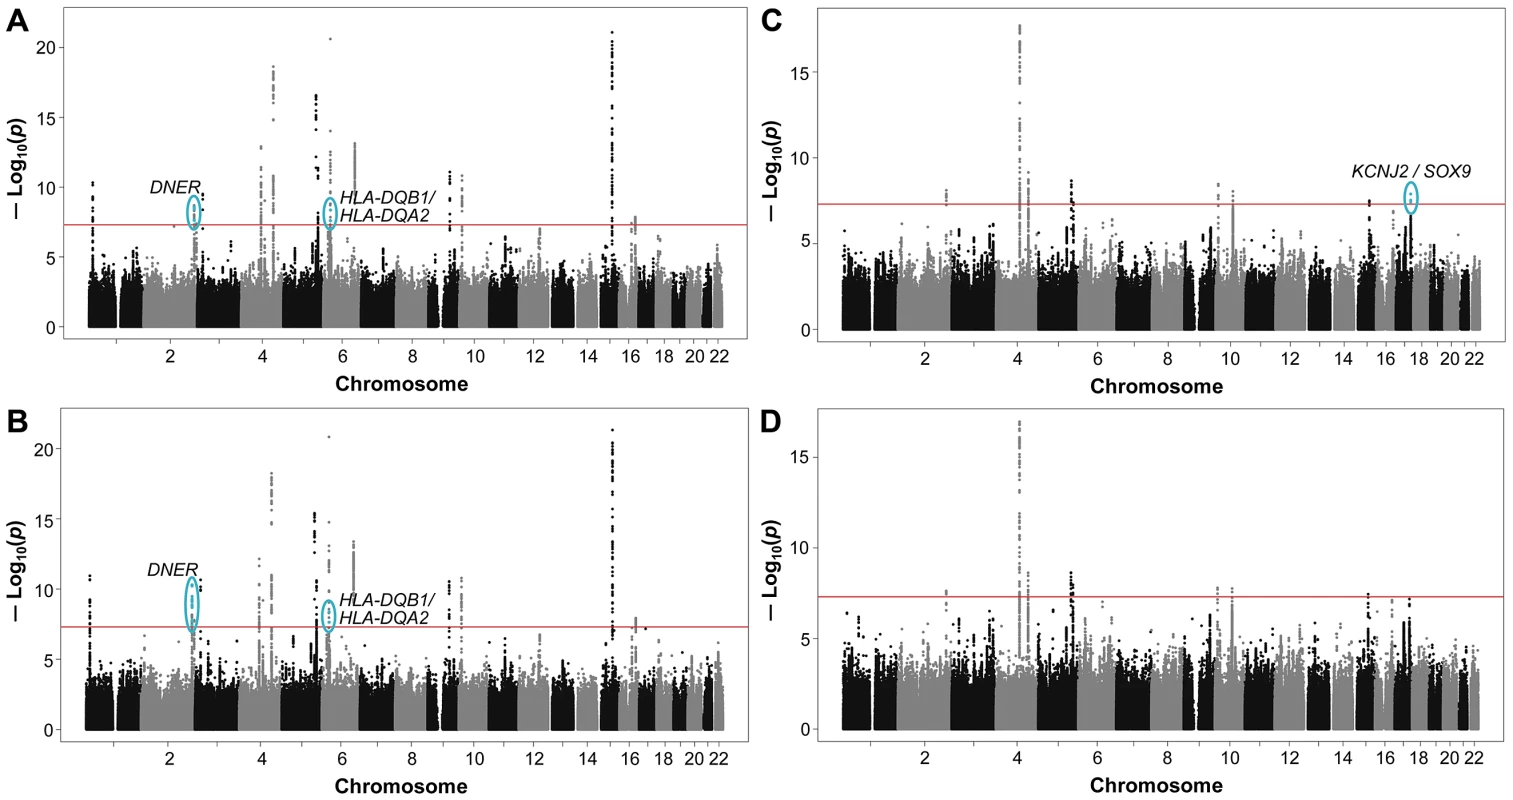 Genome-wide joint meta-analysis (JMA) of SNP and SNP-by-smoking interaction in relation to pulmonary function.